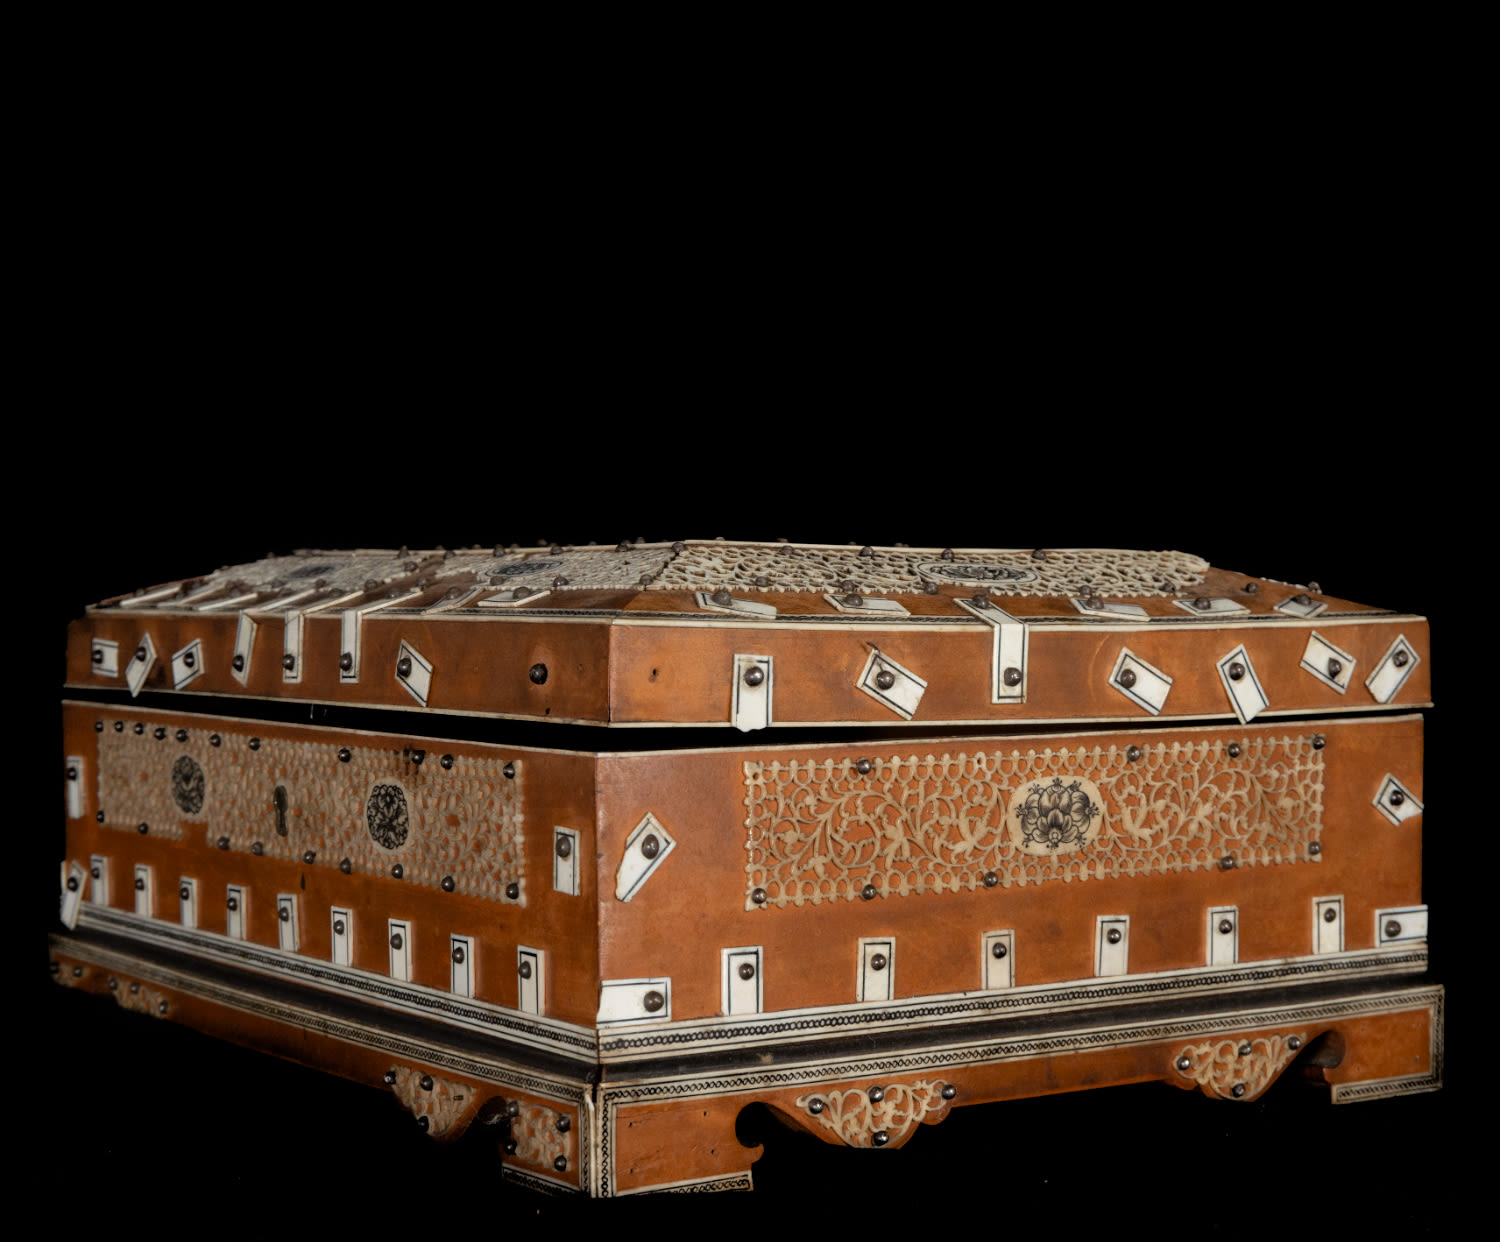 Indian tabletop chest in wood and carved bone marquetry with floral motifs, 19th century - Image 3 of 6